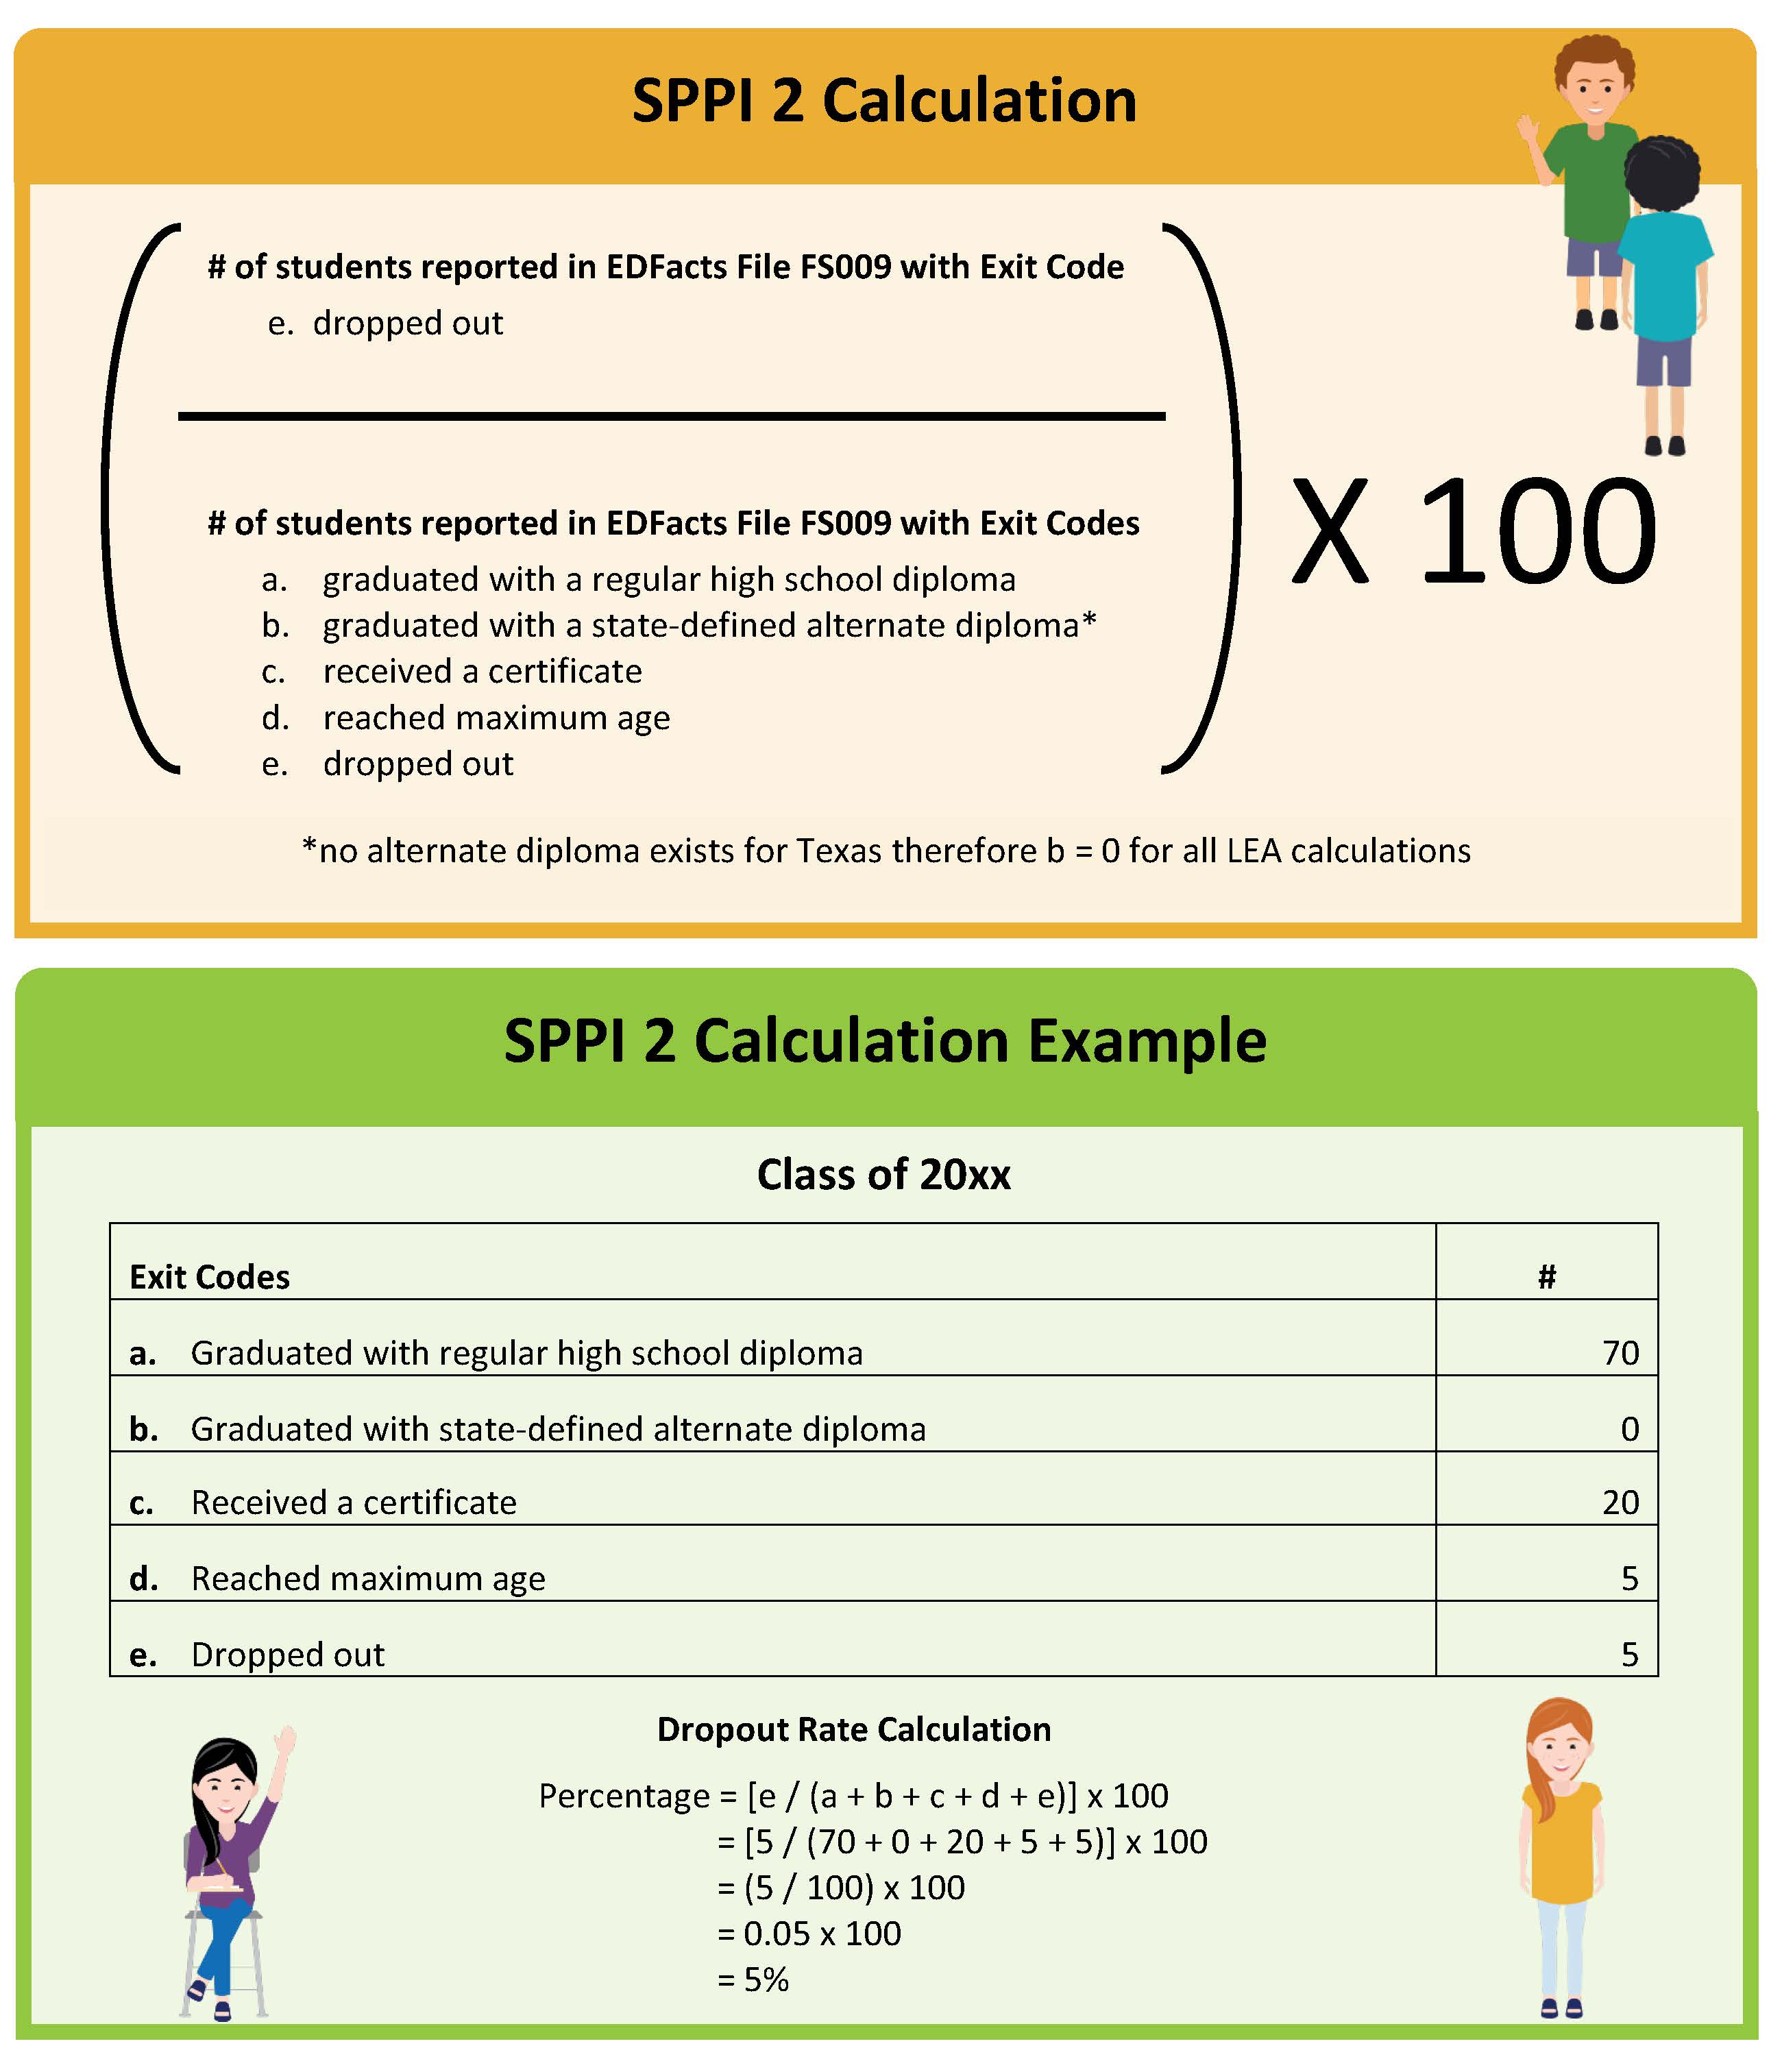 SPPI 2 Calculation and Example